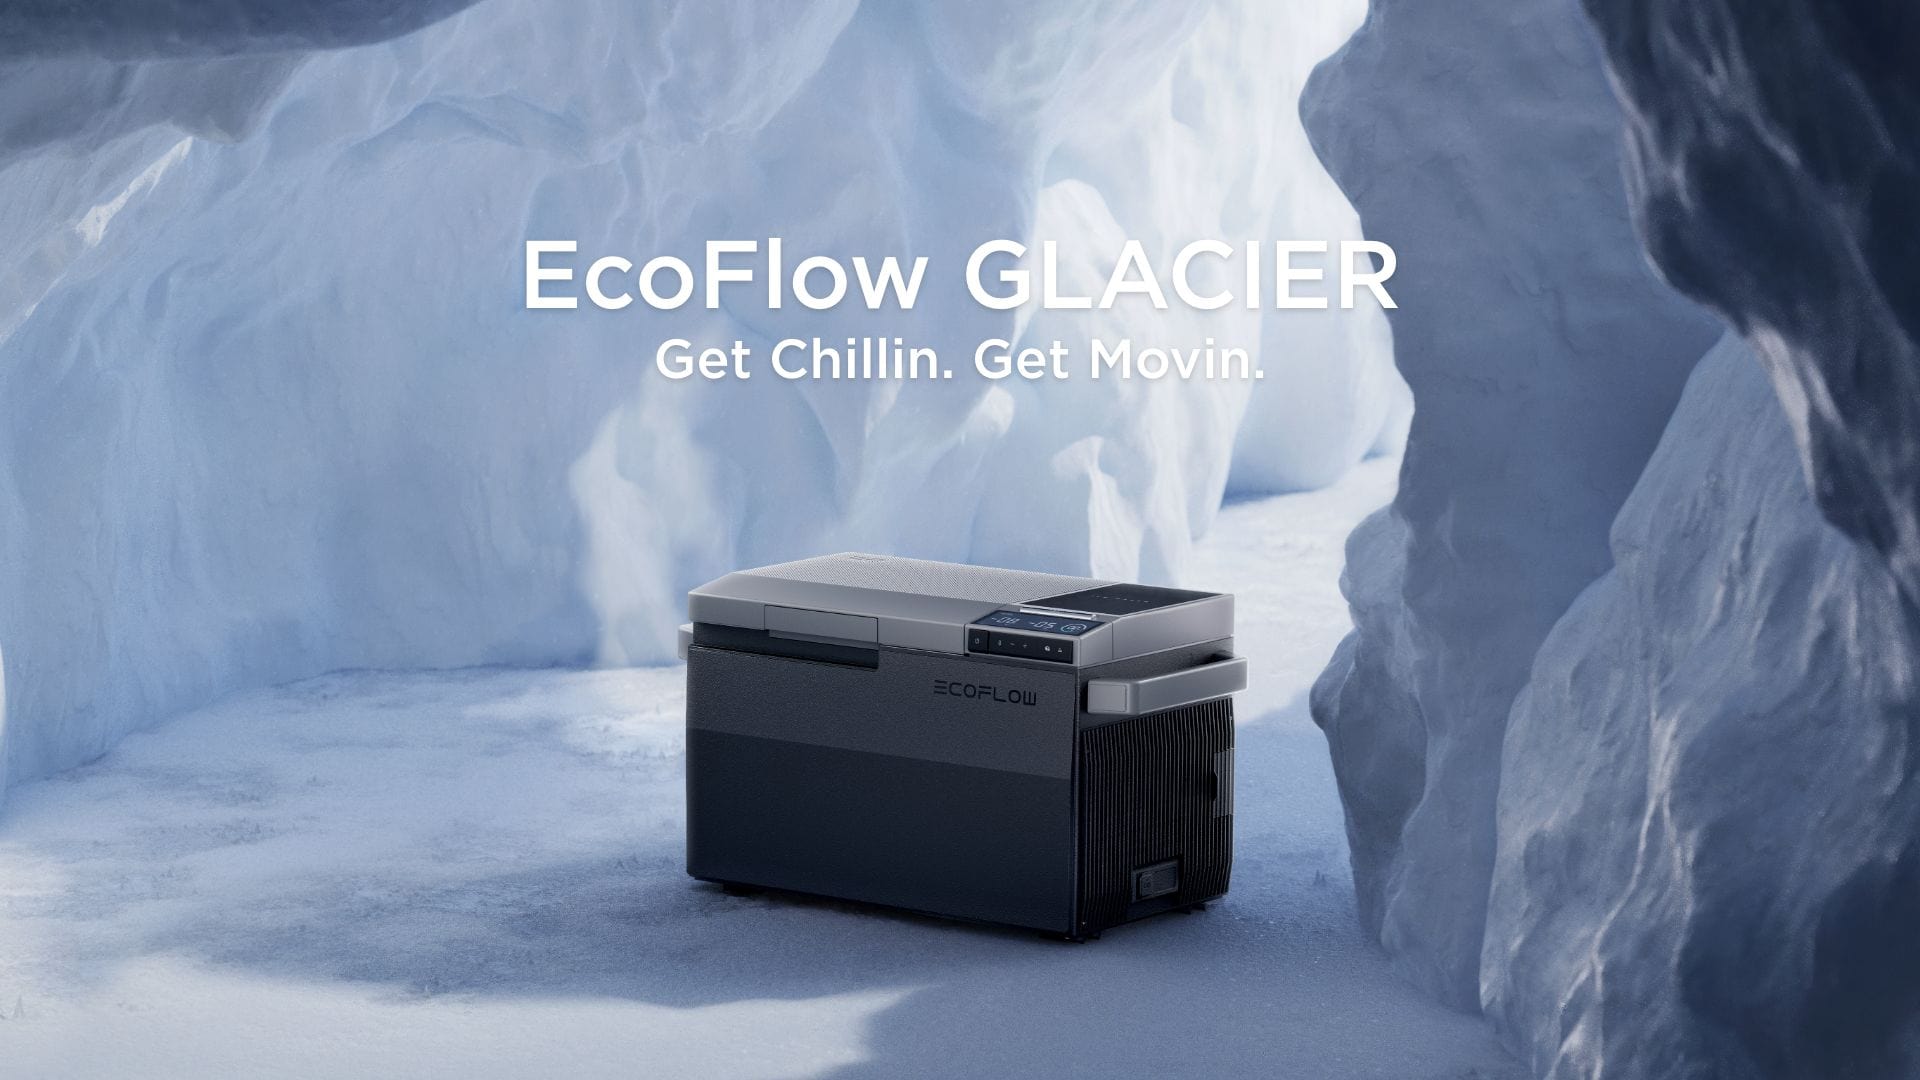 EcoFlow Glacier Battery Powered Fridge, Freezer, and Ice-Maker All in One